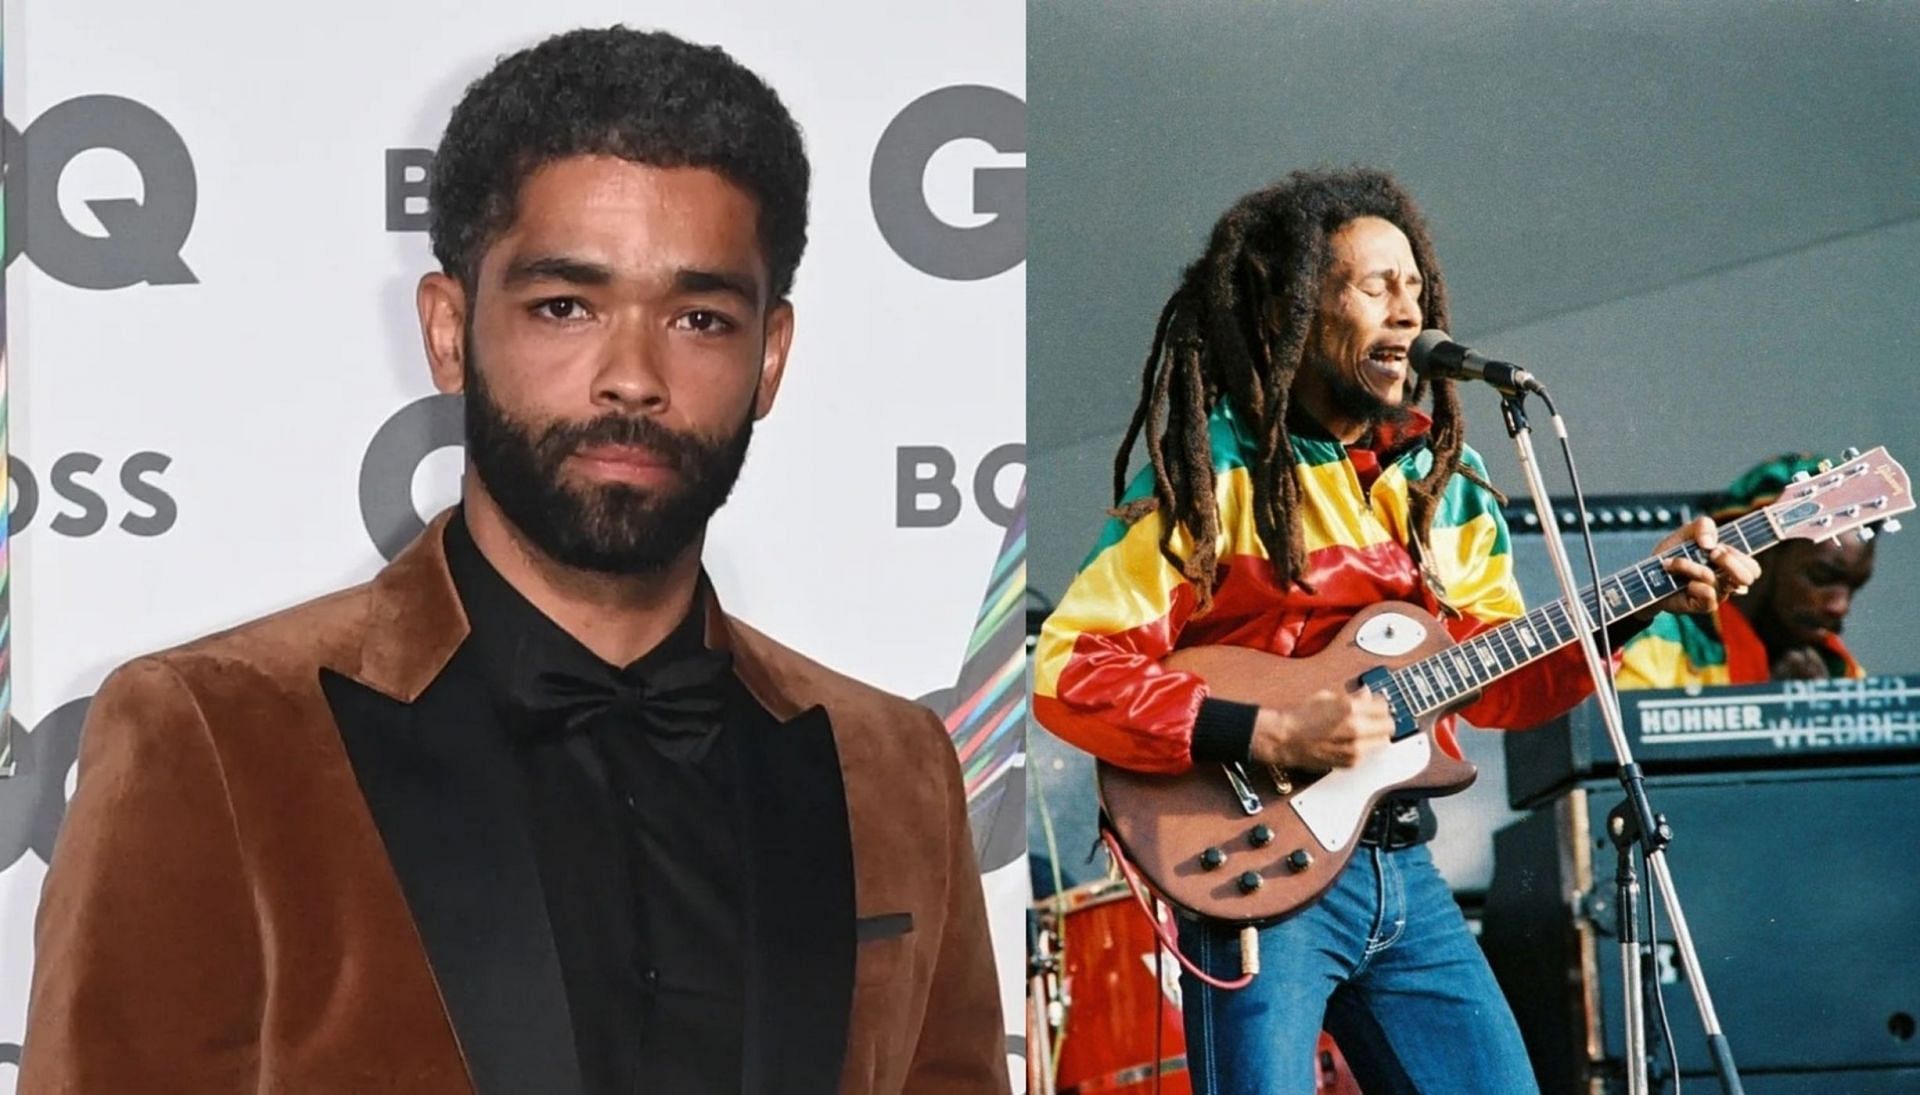 Kingsley Ben-Adir cast as Bob Marley (Image via Pete Still/Getty Images, and David M. Benett/Getty Images)